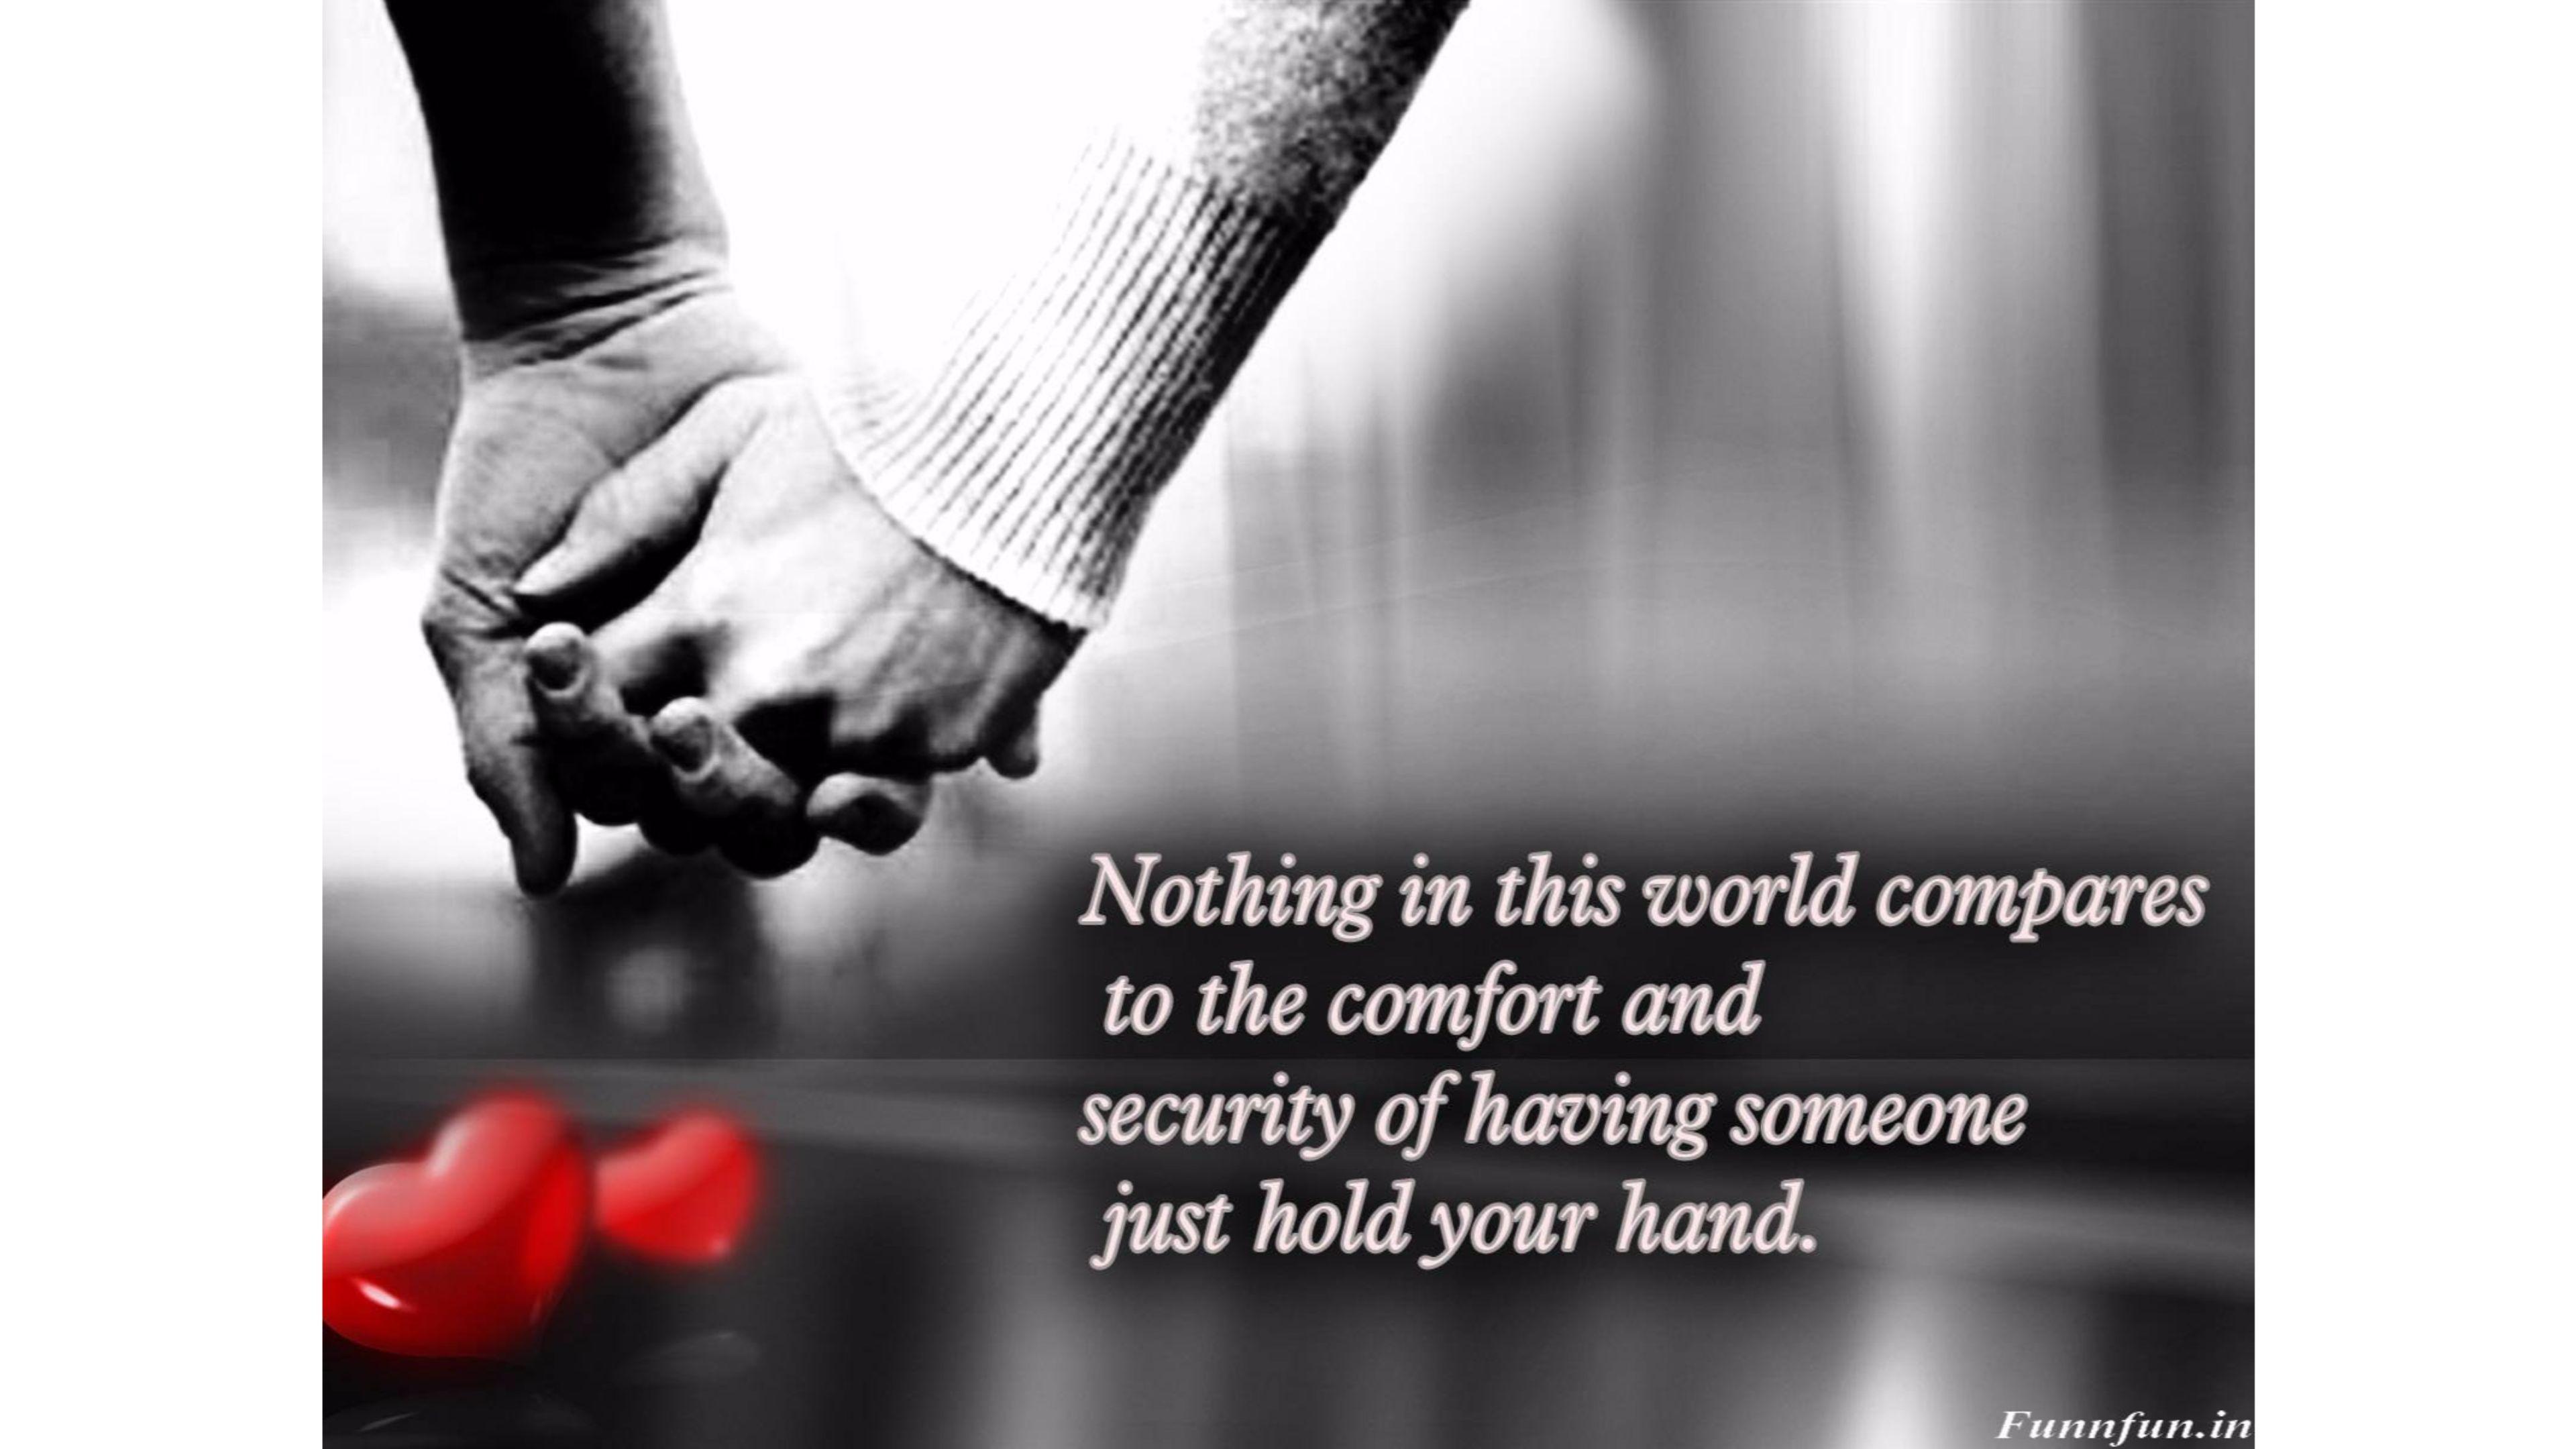 Beautiful Love Quotes. QUOTES OF THE DAY